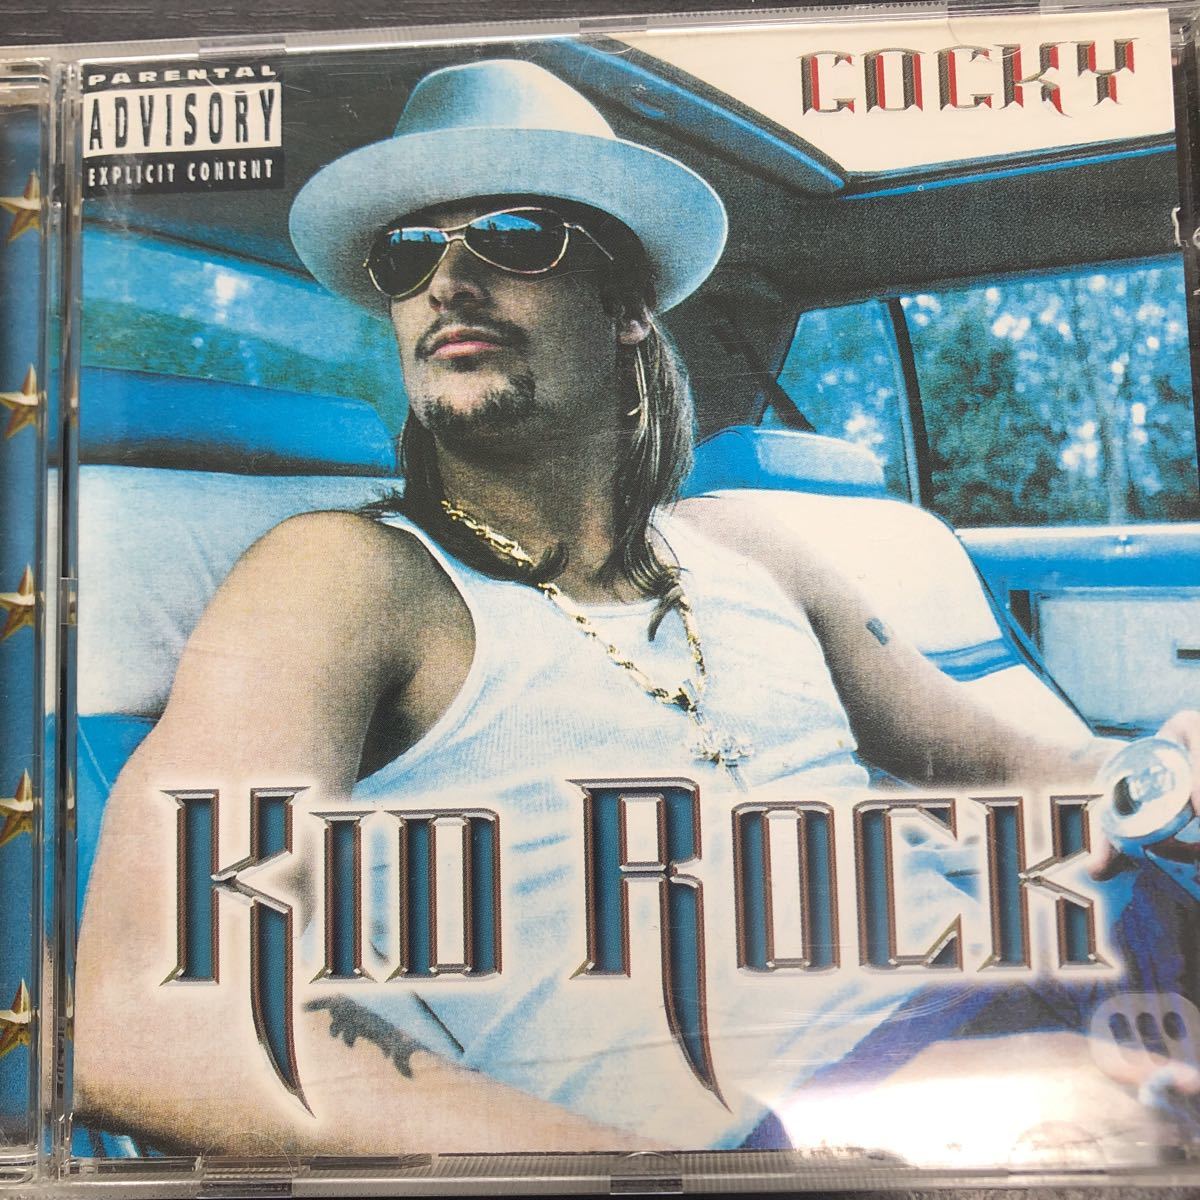 CD／キッド・ロック／COCKY／輸入盤／ハードロック_画像1